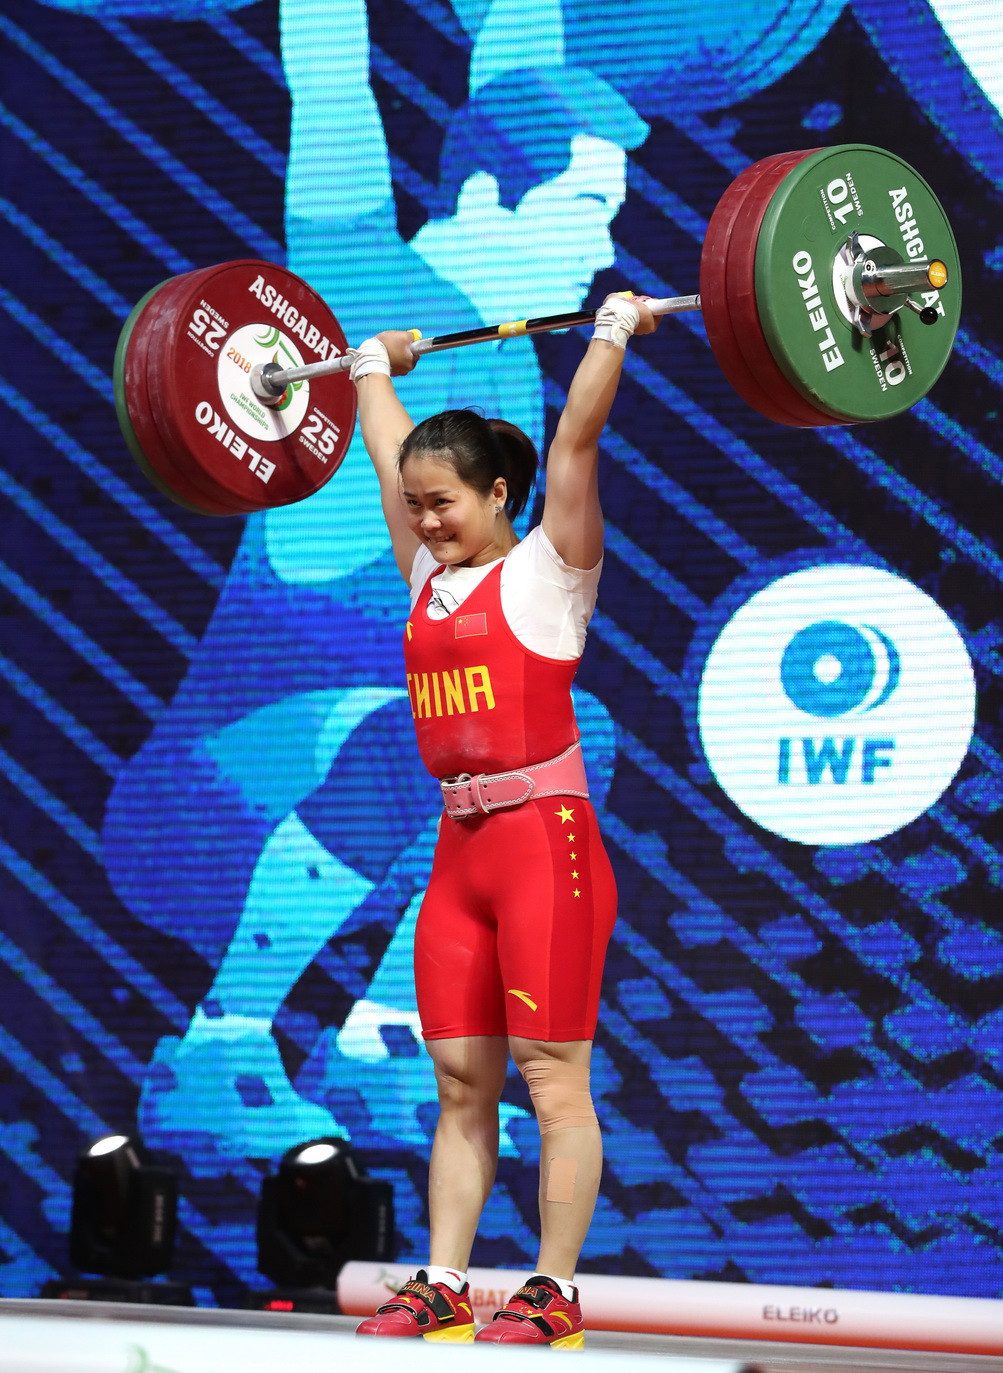 China's Deng Wei set world standards in the women’s 64 kilograms snatch, clean and jerk and total events as her country moved to the top of the medal standings on day five of the 2018 International Weightlifting Federation World Championships in Ashgabat 